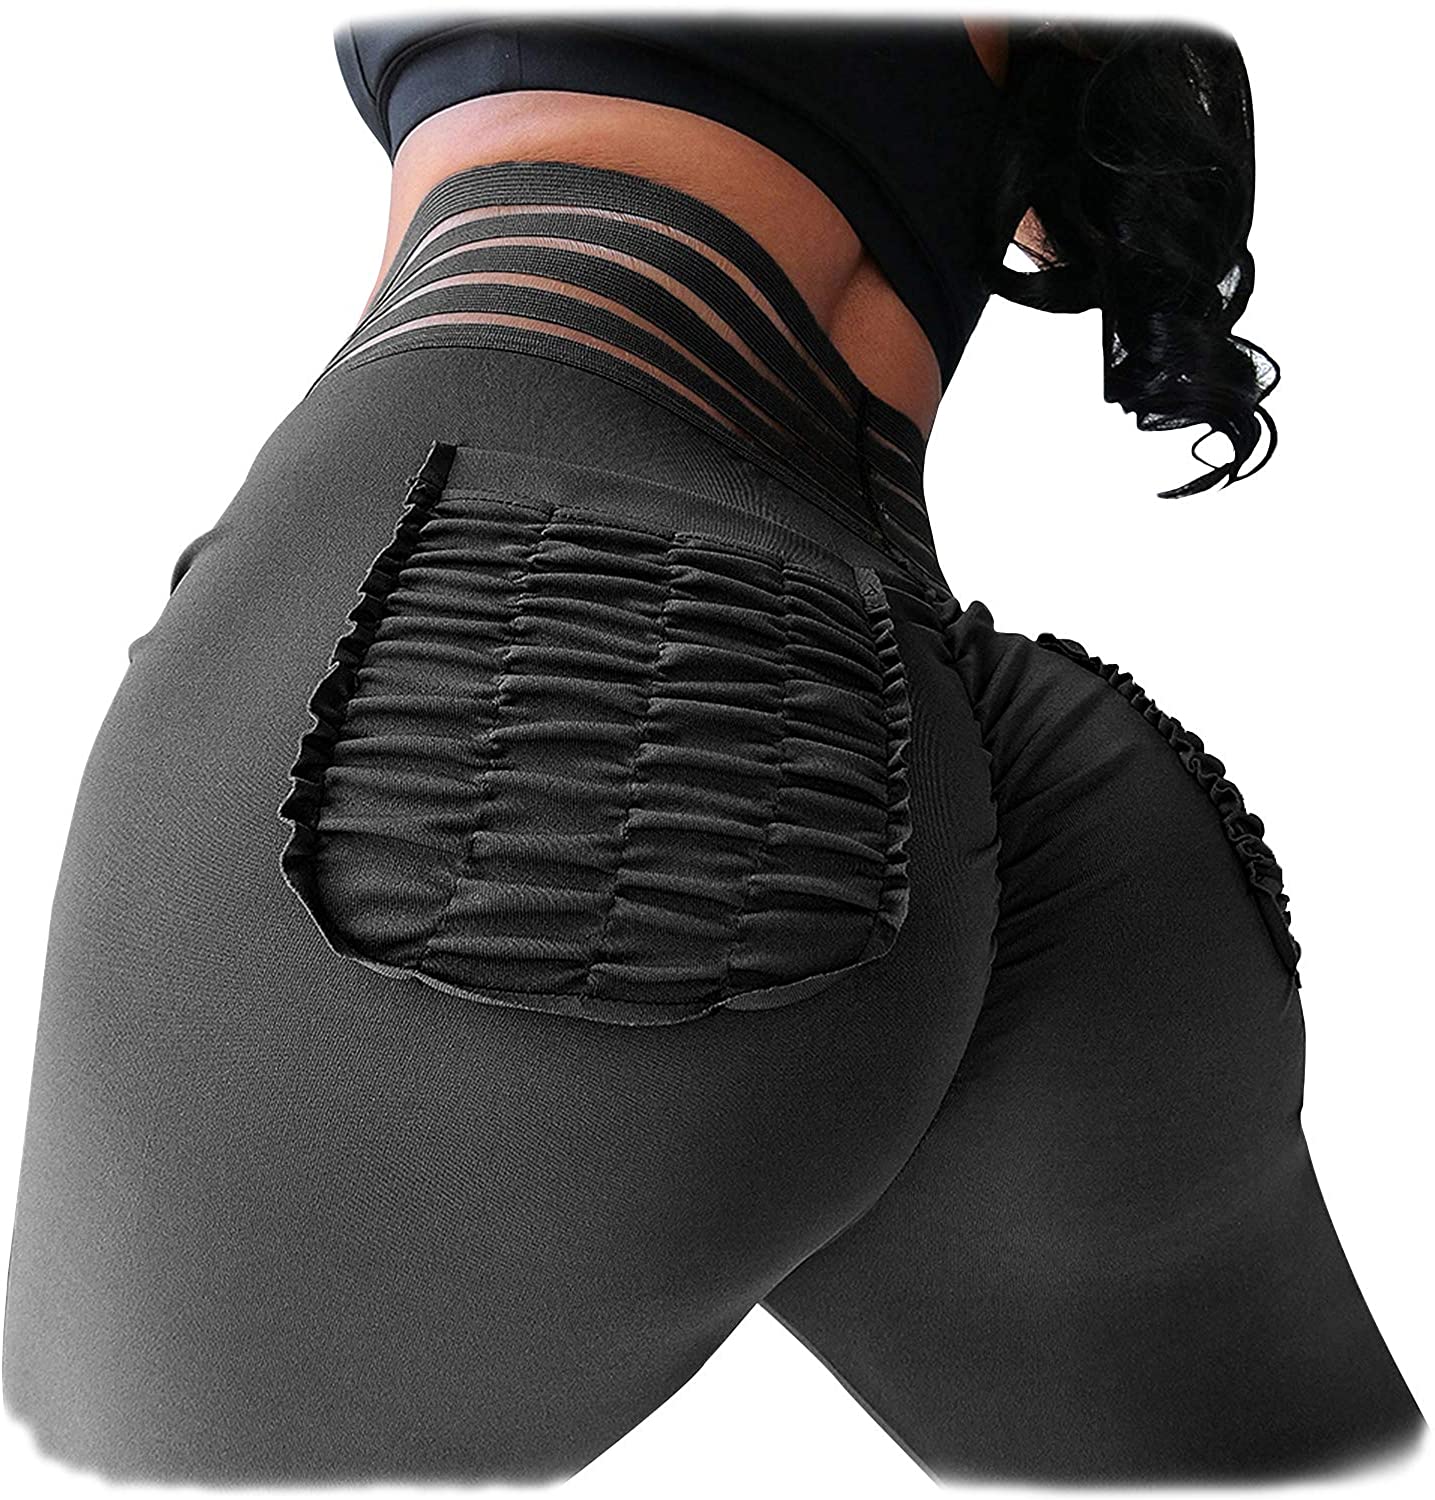 High Waist Butt Lift Push Up Leggings For Women Perfect For Yoga, Gym, And  Fitness Capri Tights For Sports And Workouts H1221 From Mengyang10, $16.51